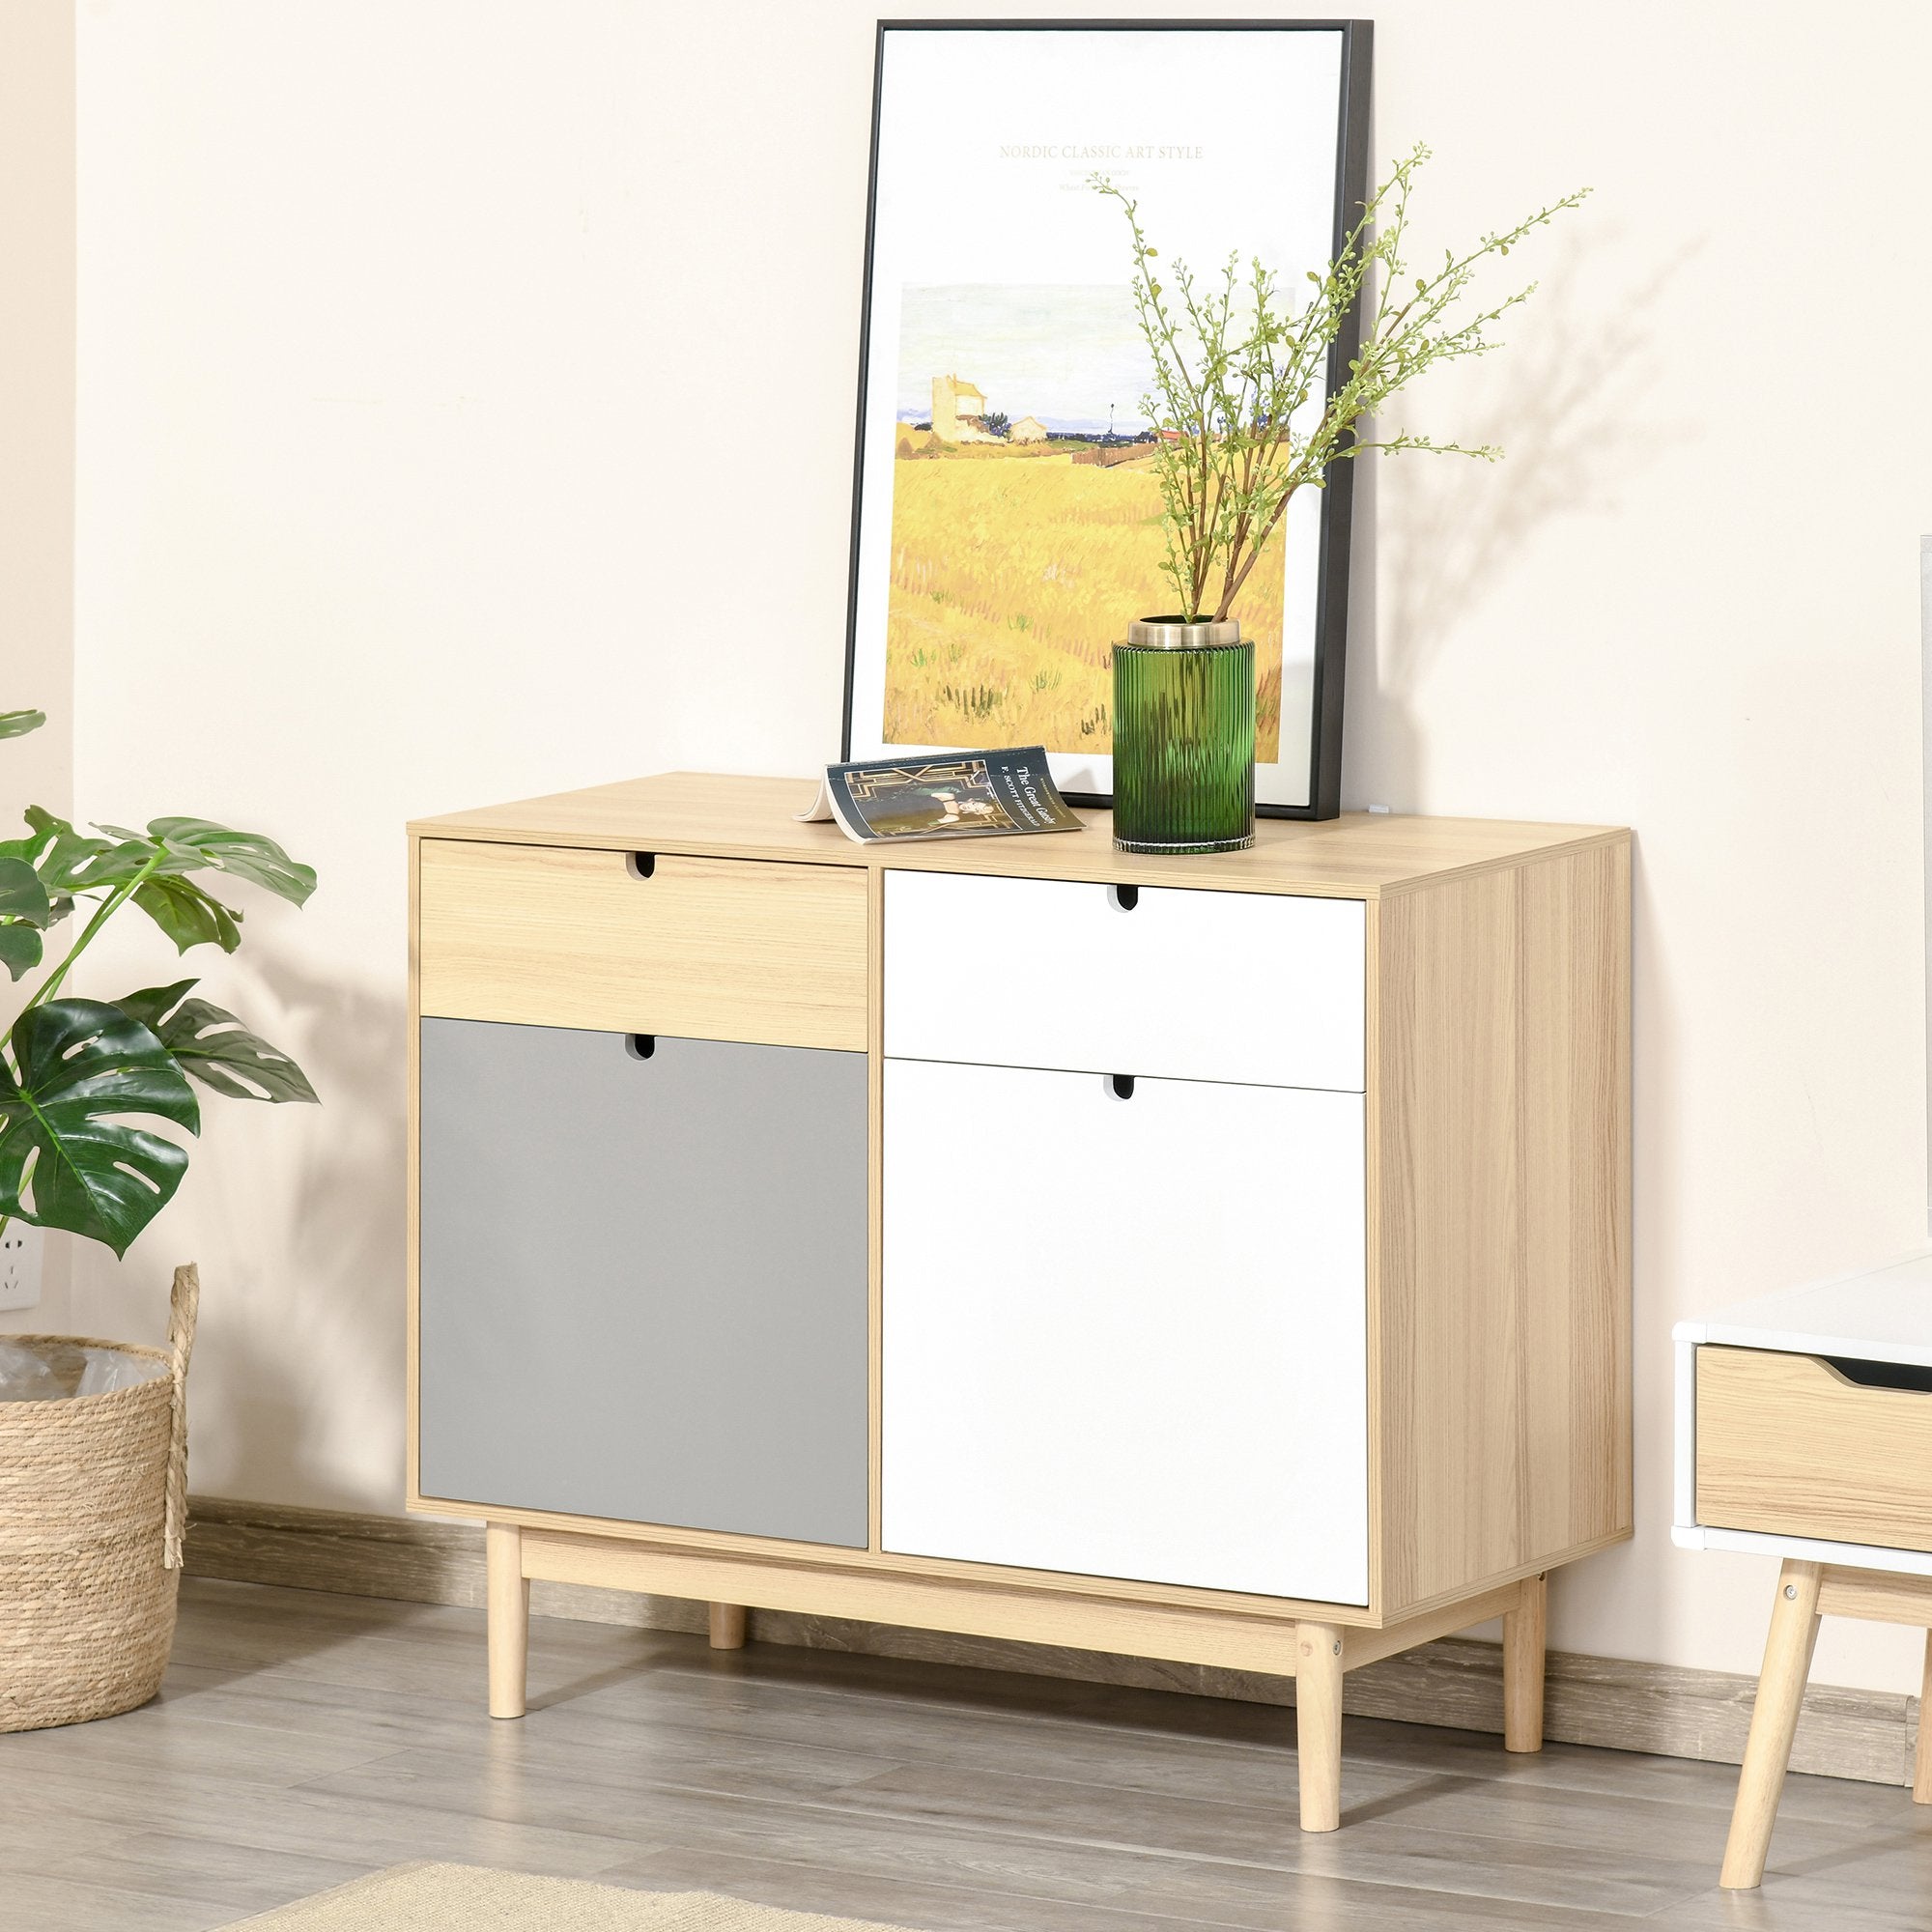 HOMCOM Sideboard Storage Cabinet Kitchen Cupboard with Drawers for Bedroom, Living Room, Entryway - Inspirely